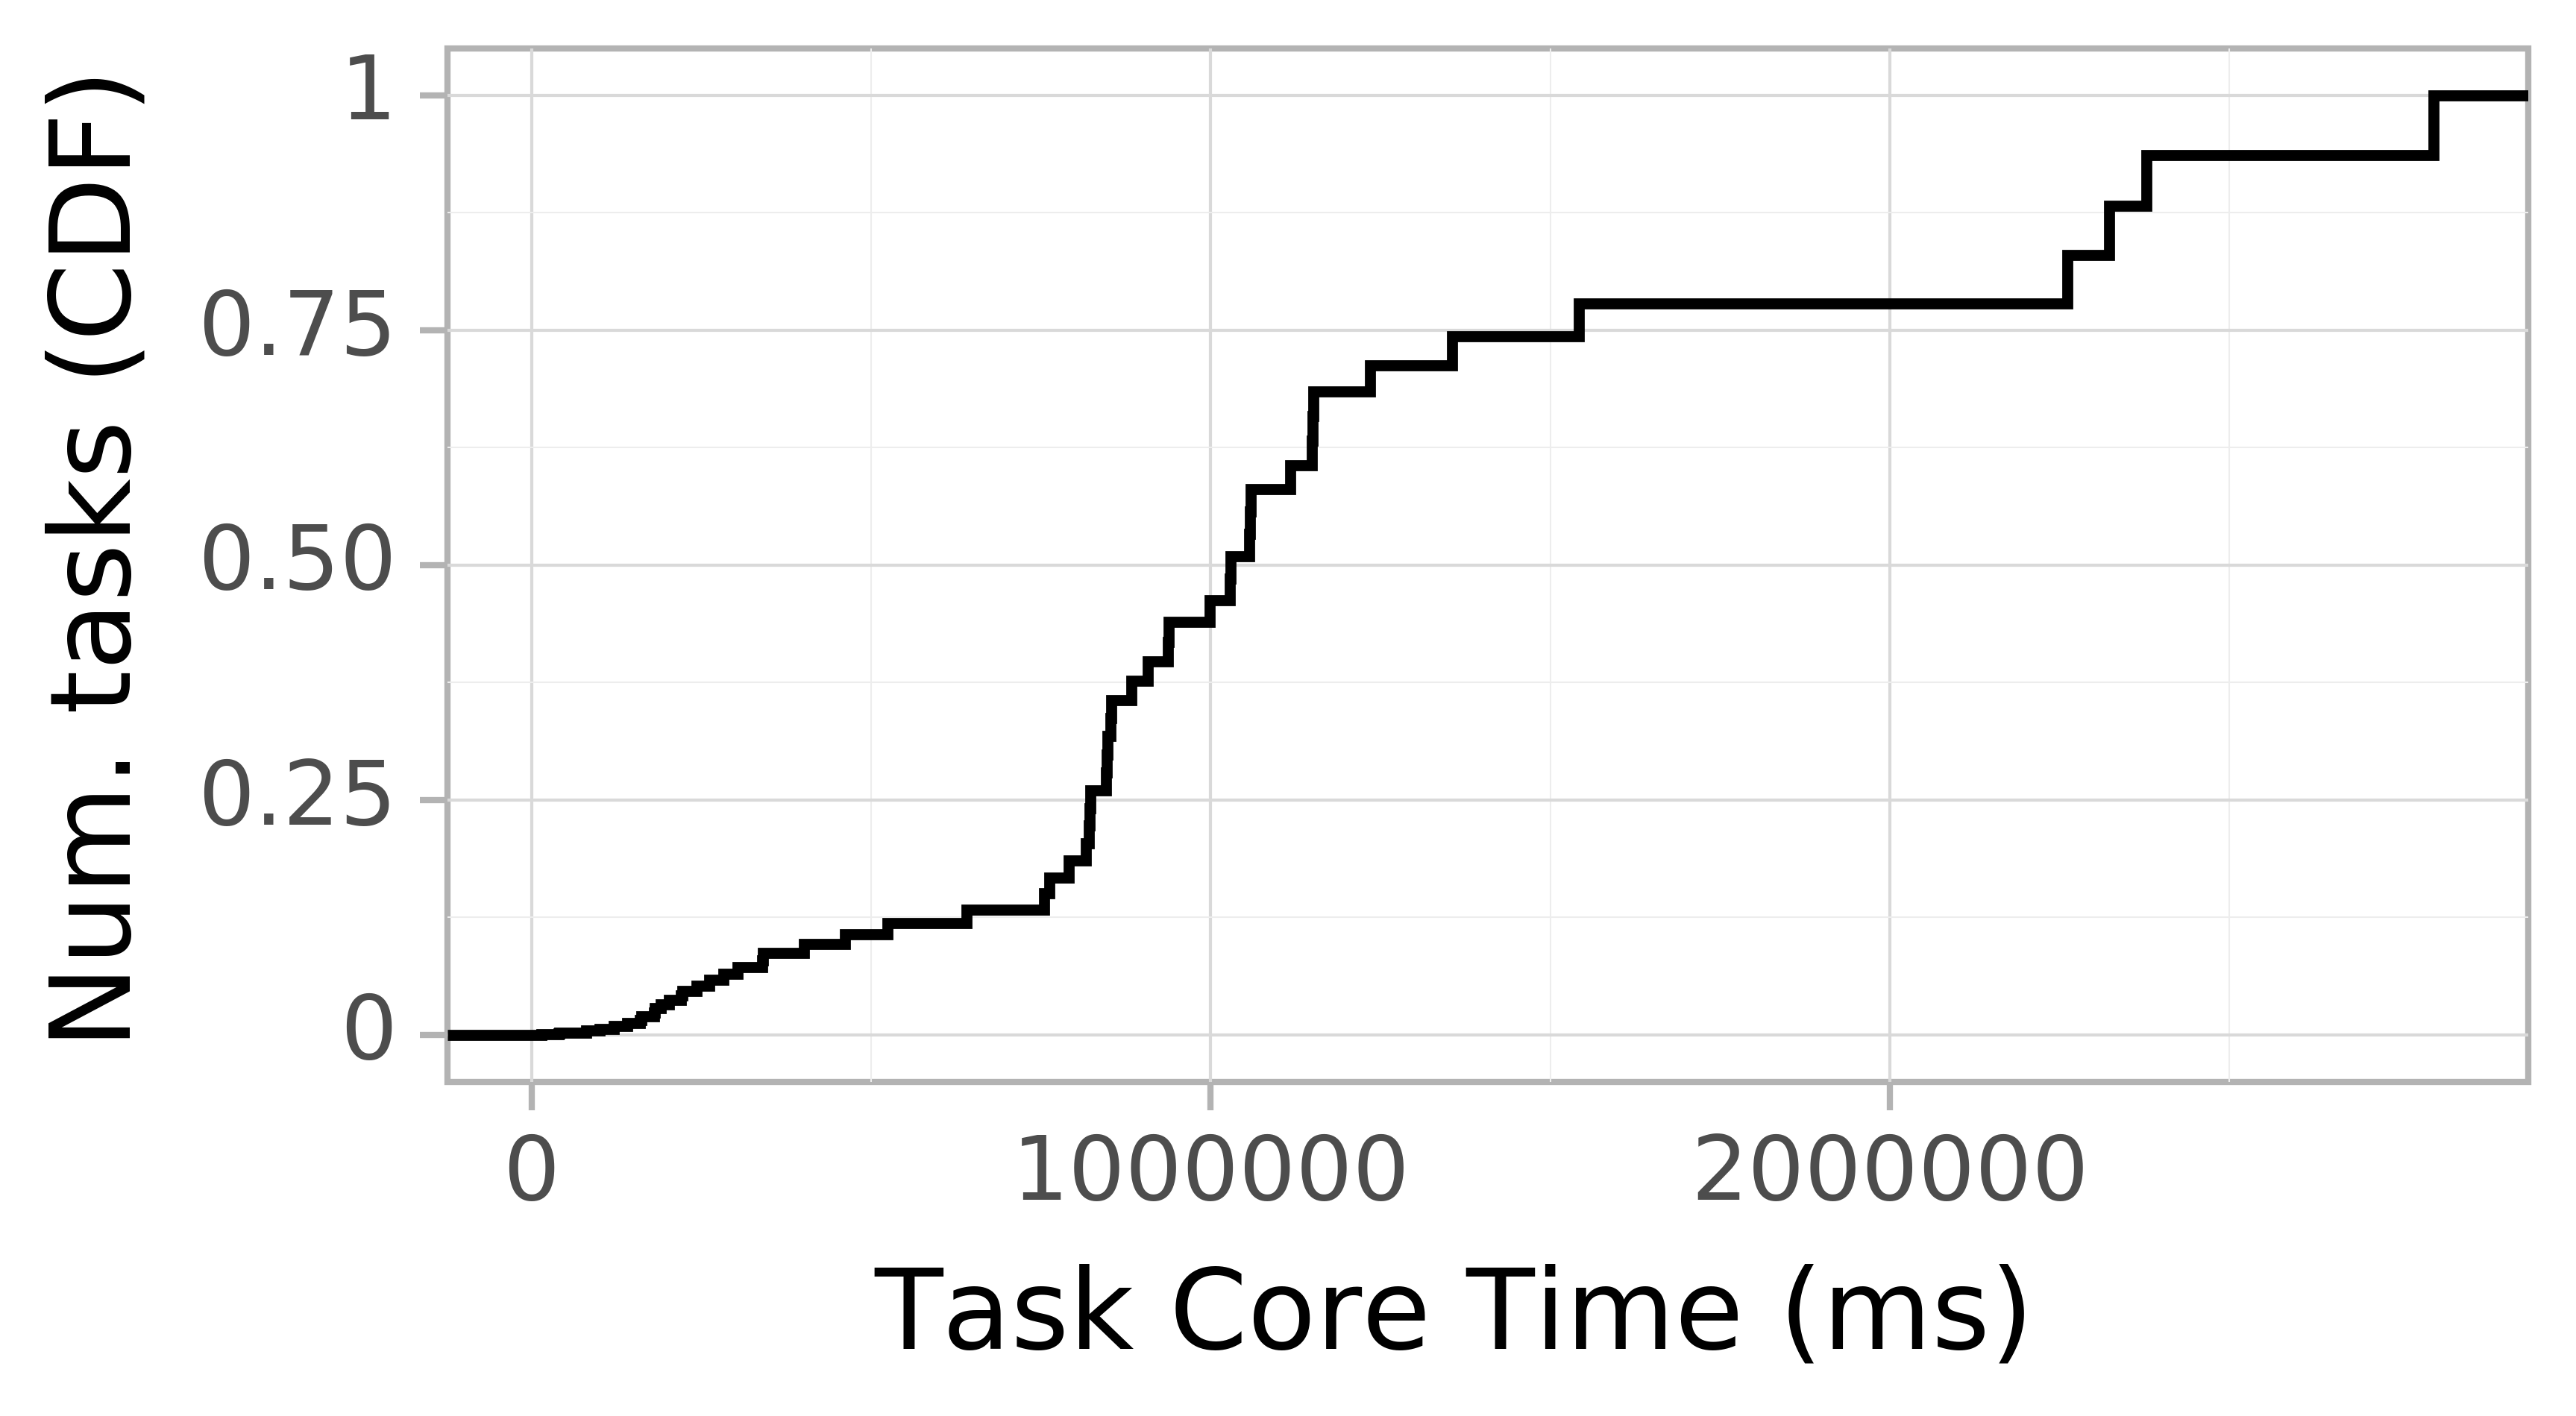 task resource time CDF graph for the Pegasus_P1 trace.